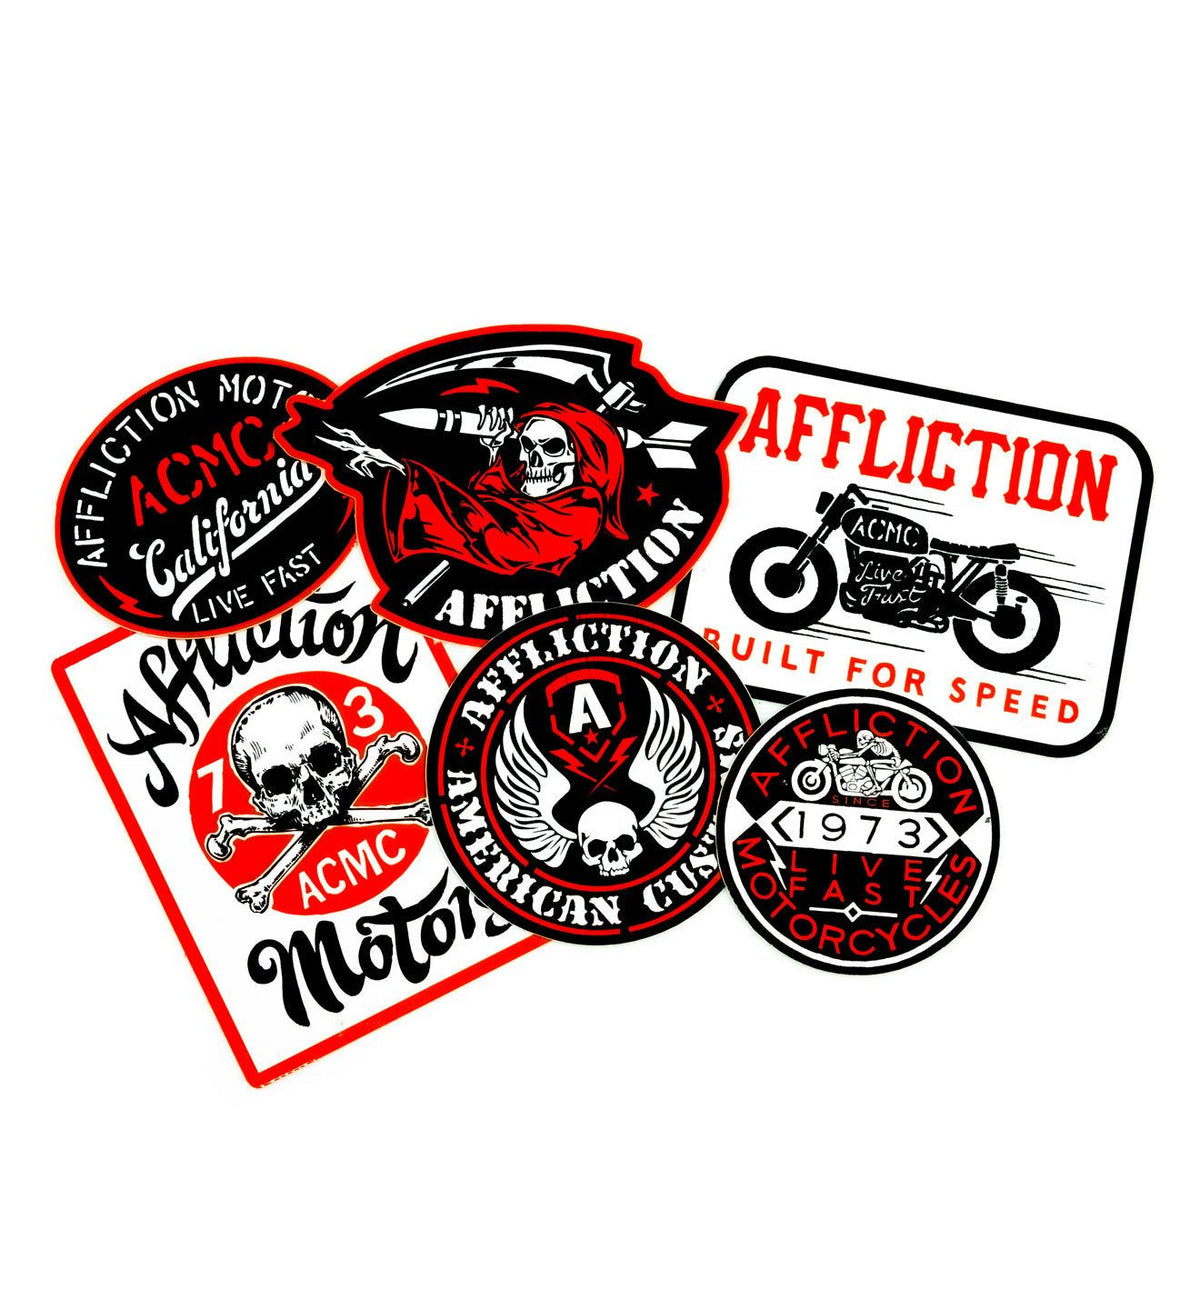 ACMC Sticker Pack - Affliction Clothing